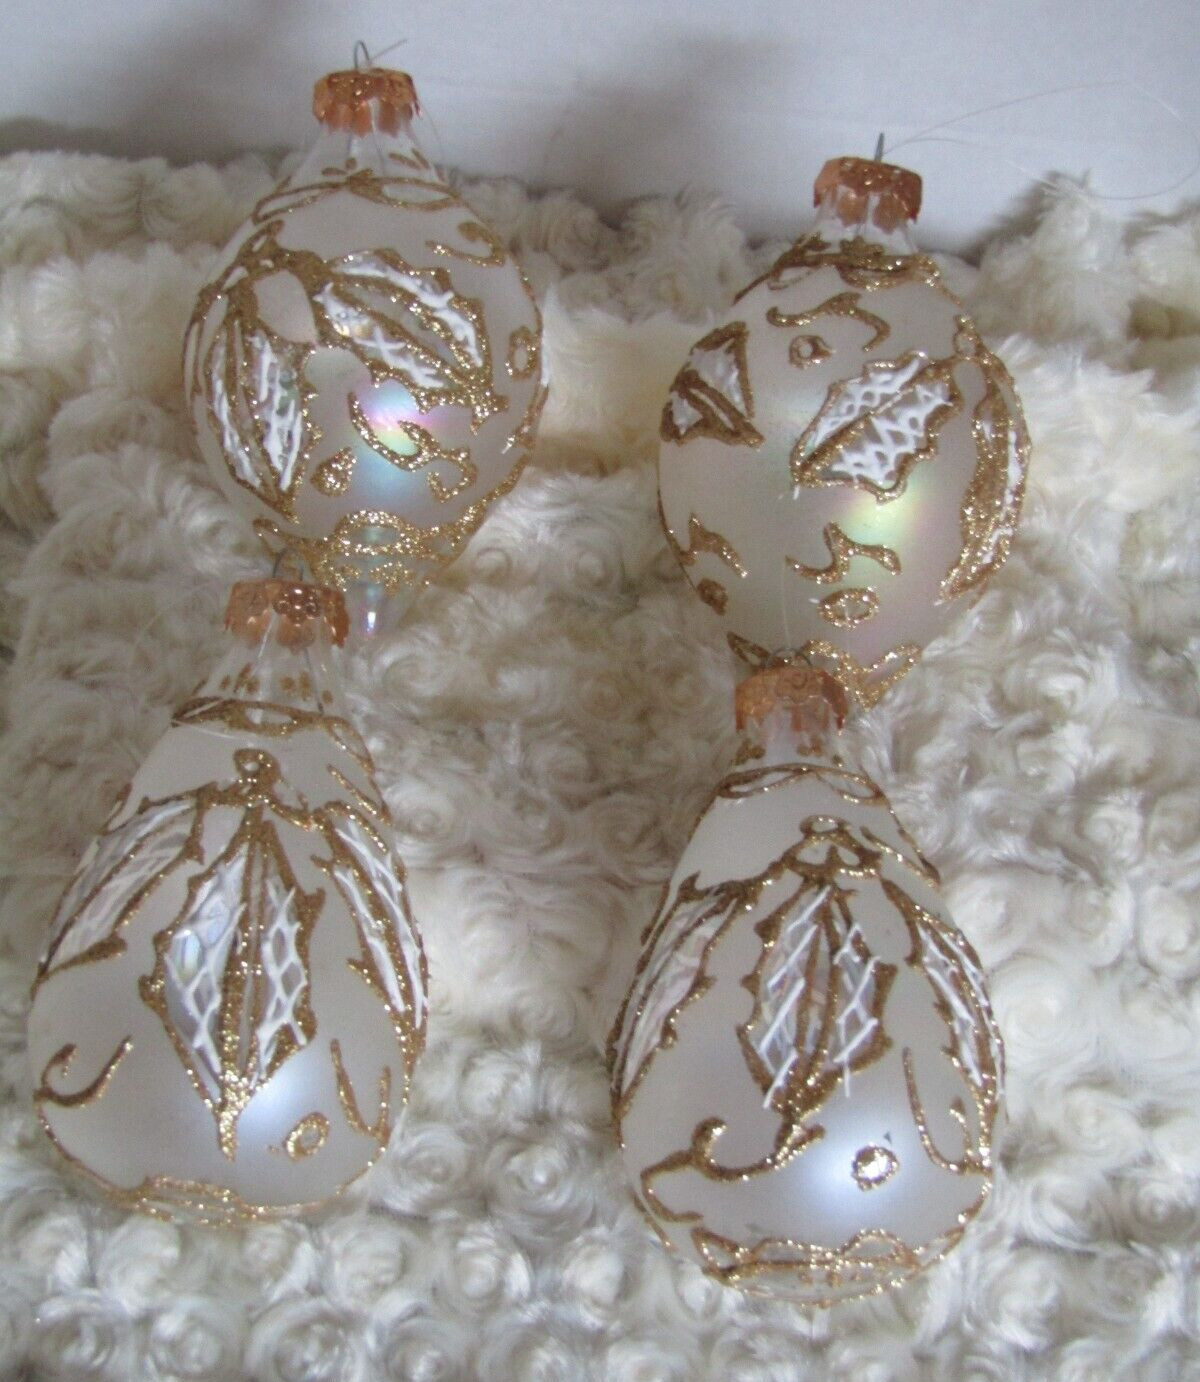 Set of 4 Gold Glittered relief fancy embellished Frosted teardrop glass ornament